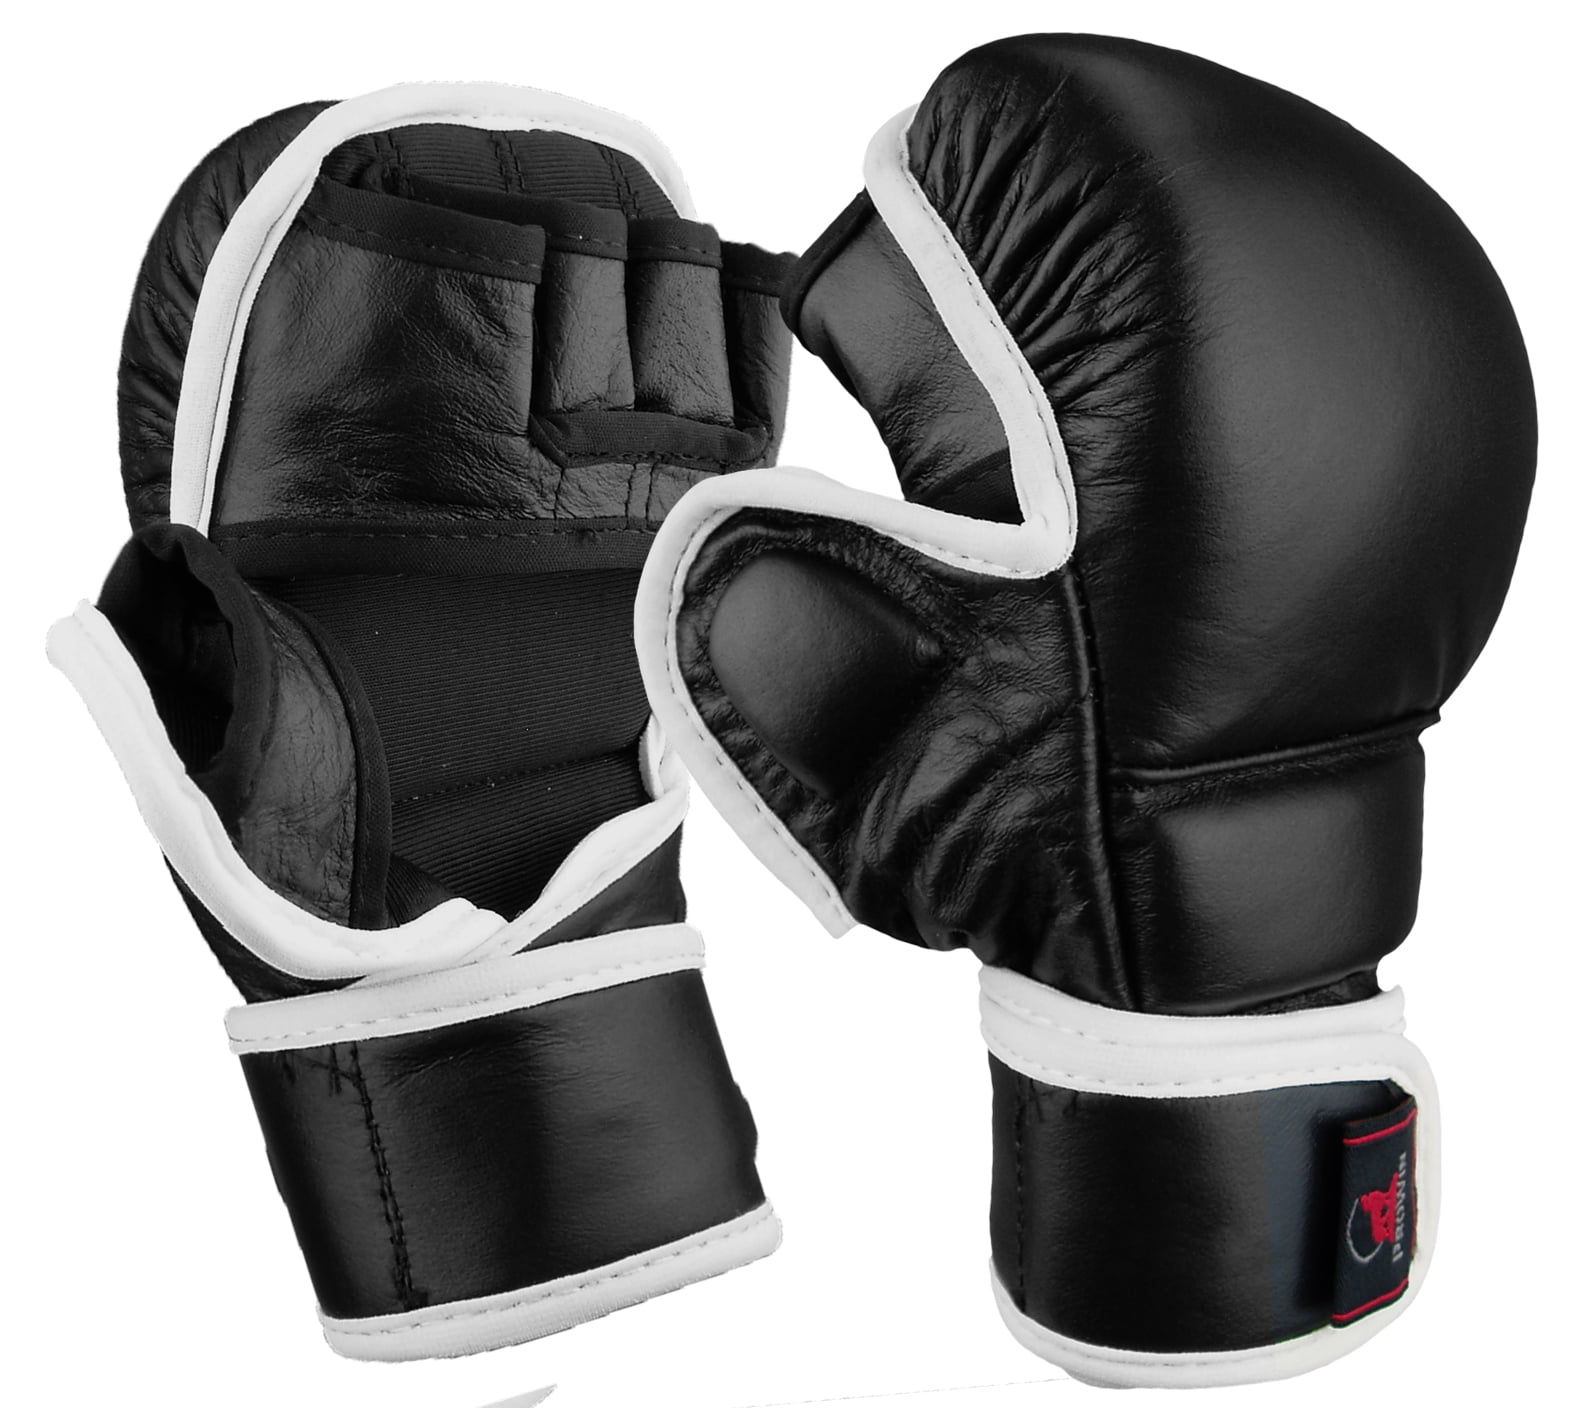 Sparring Gloves Boxing Martial Arts MMA Punching Bag UFC Cage Fight Training Mit 